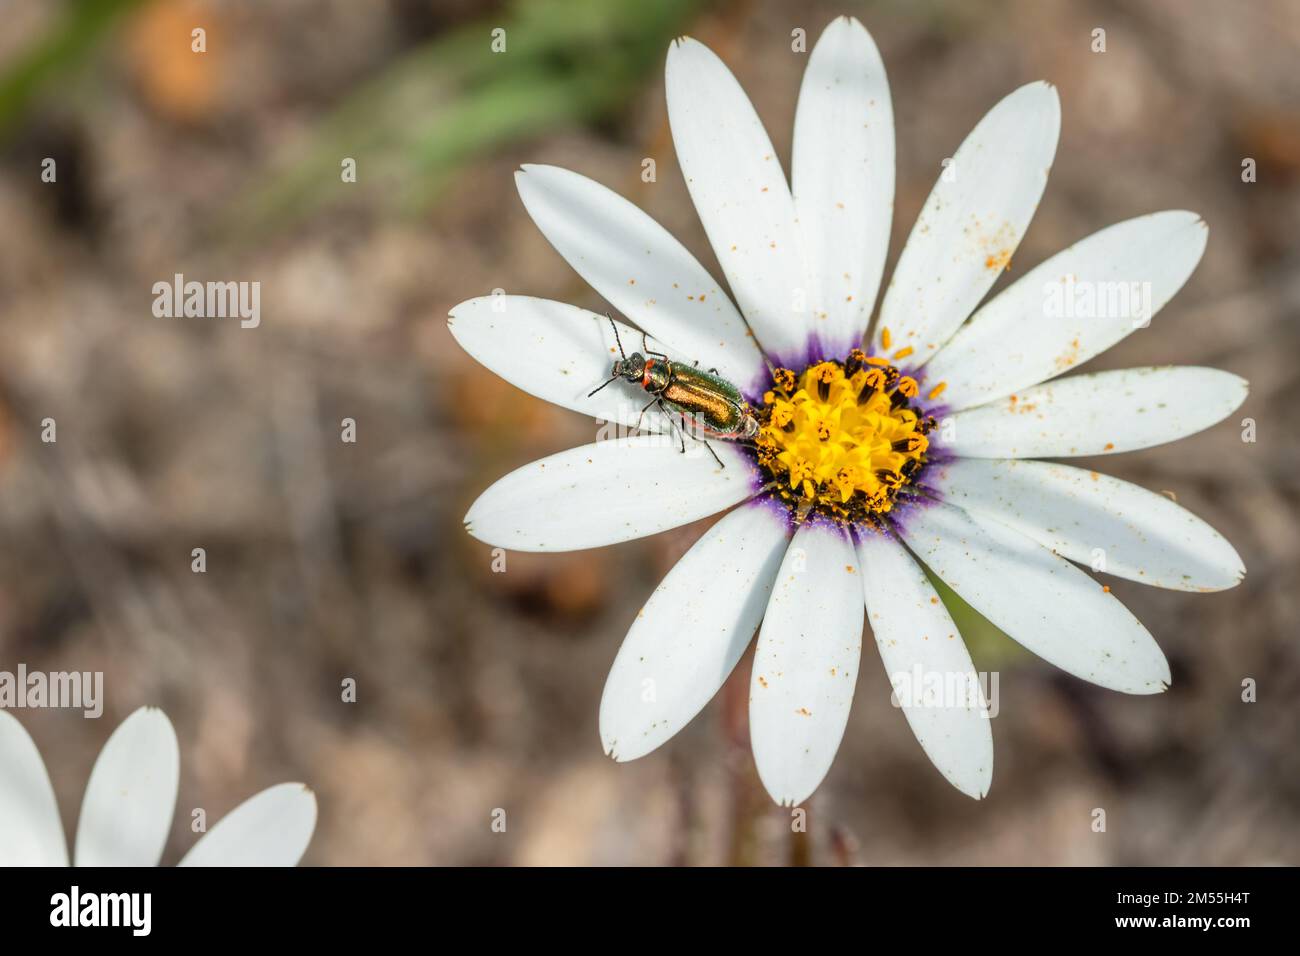 Soft-winged flower beetle (genus hedybius) on a African daisy flower (Osteospermum), Cape Town, South Africa Stock Photo